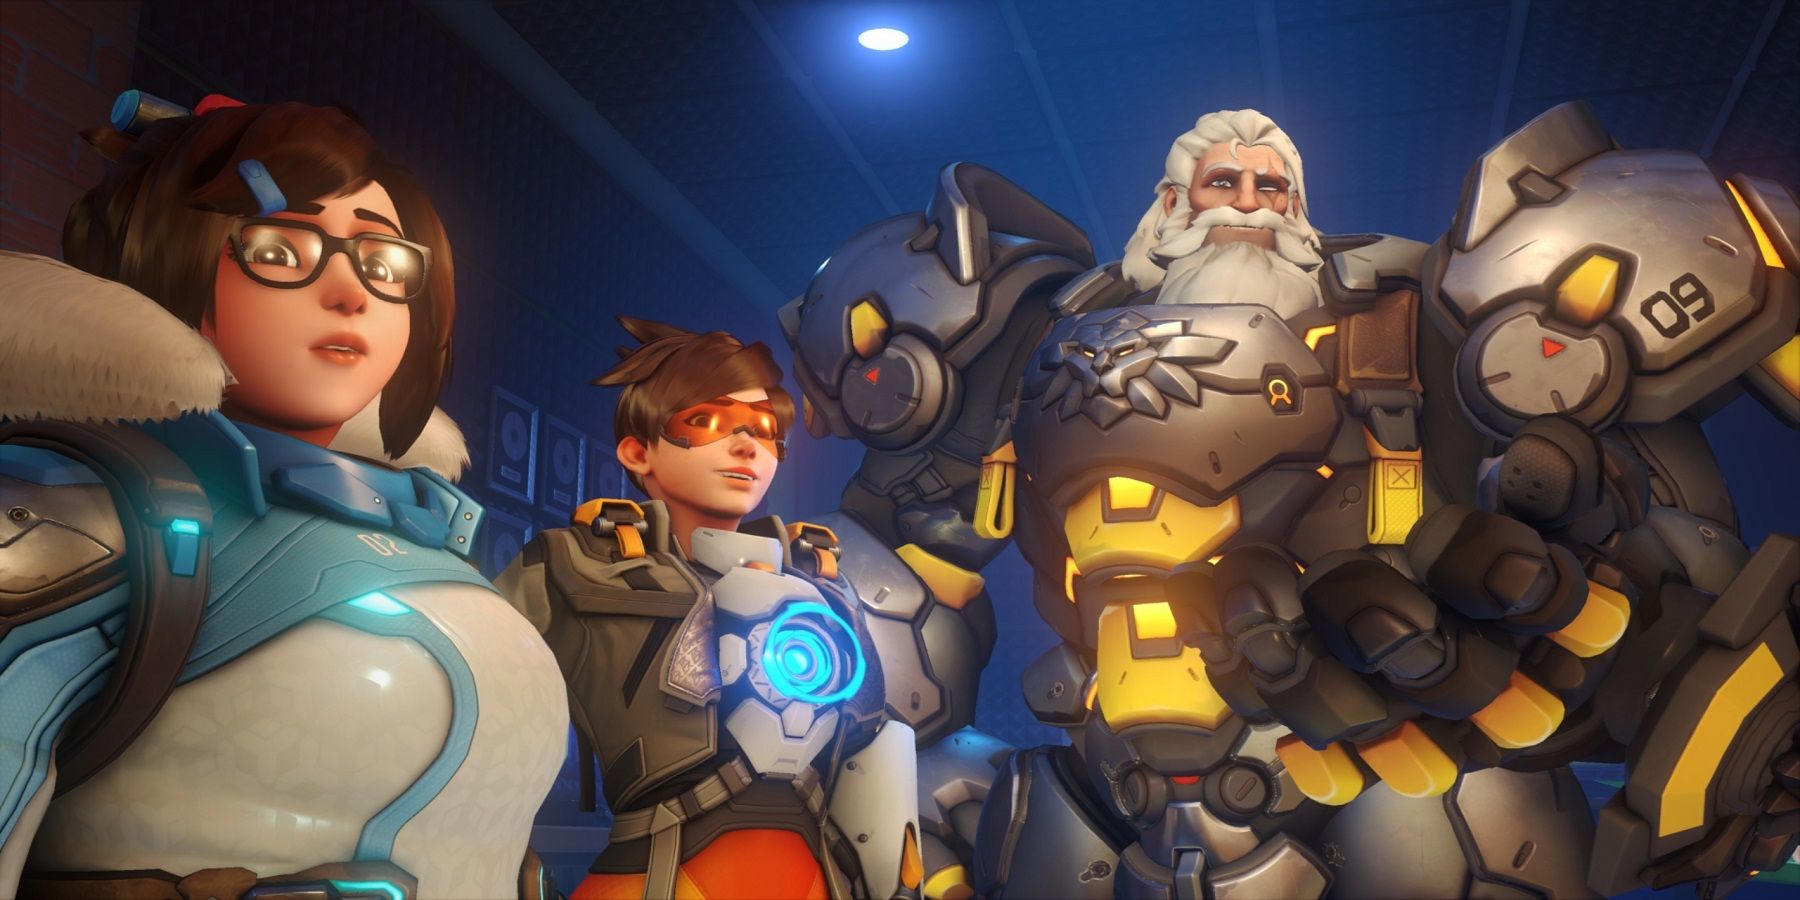 An Overwatch player gives their thoughts about how powerful the characters are according to the narrative.